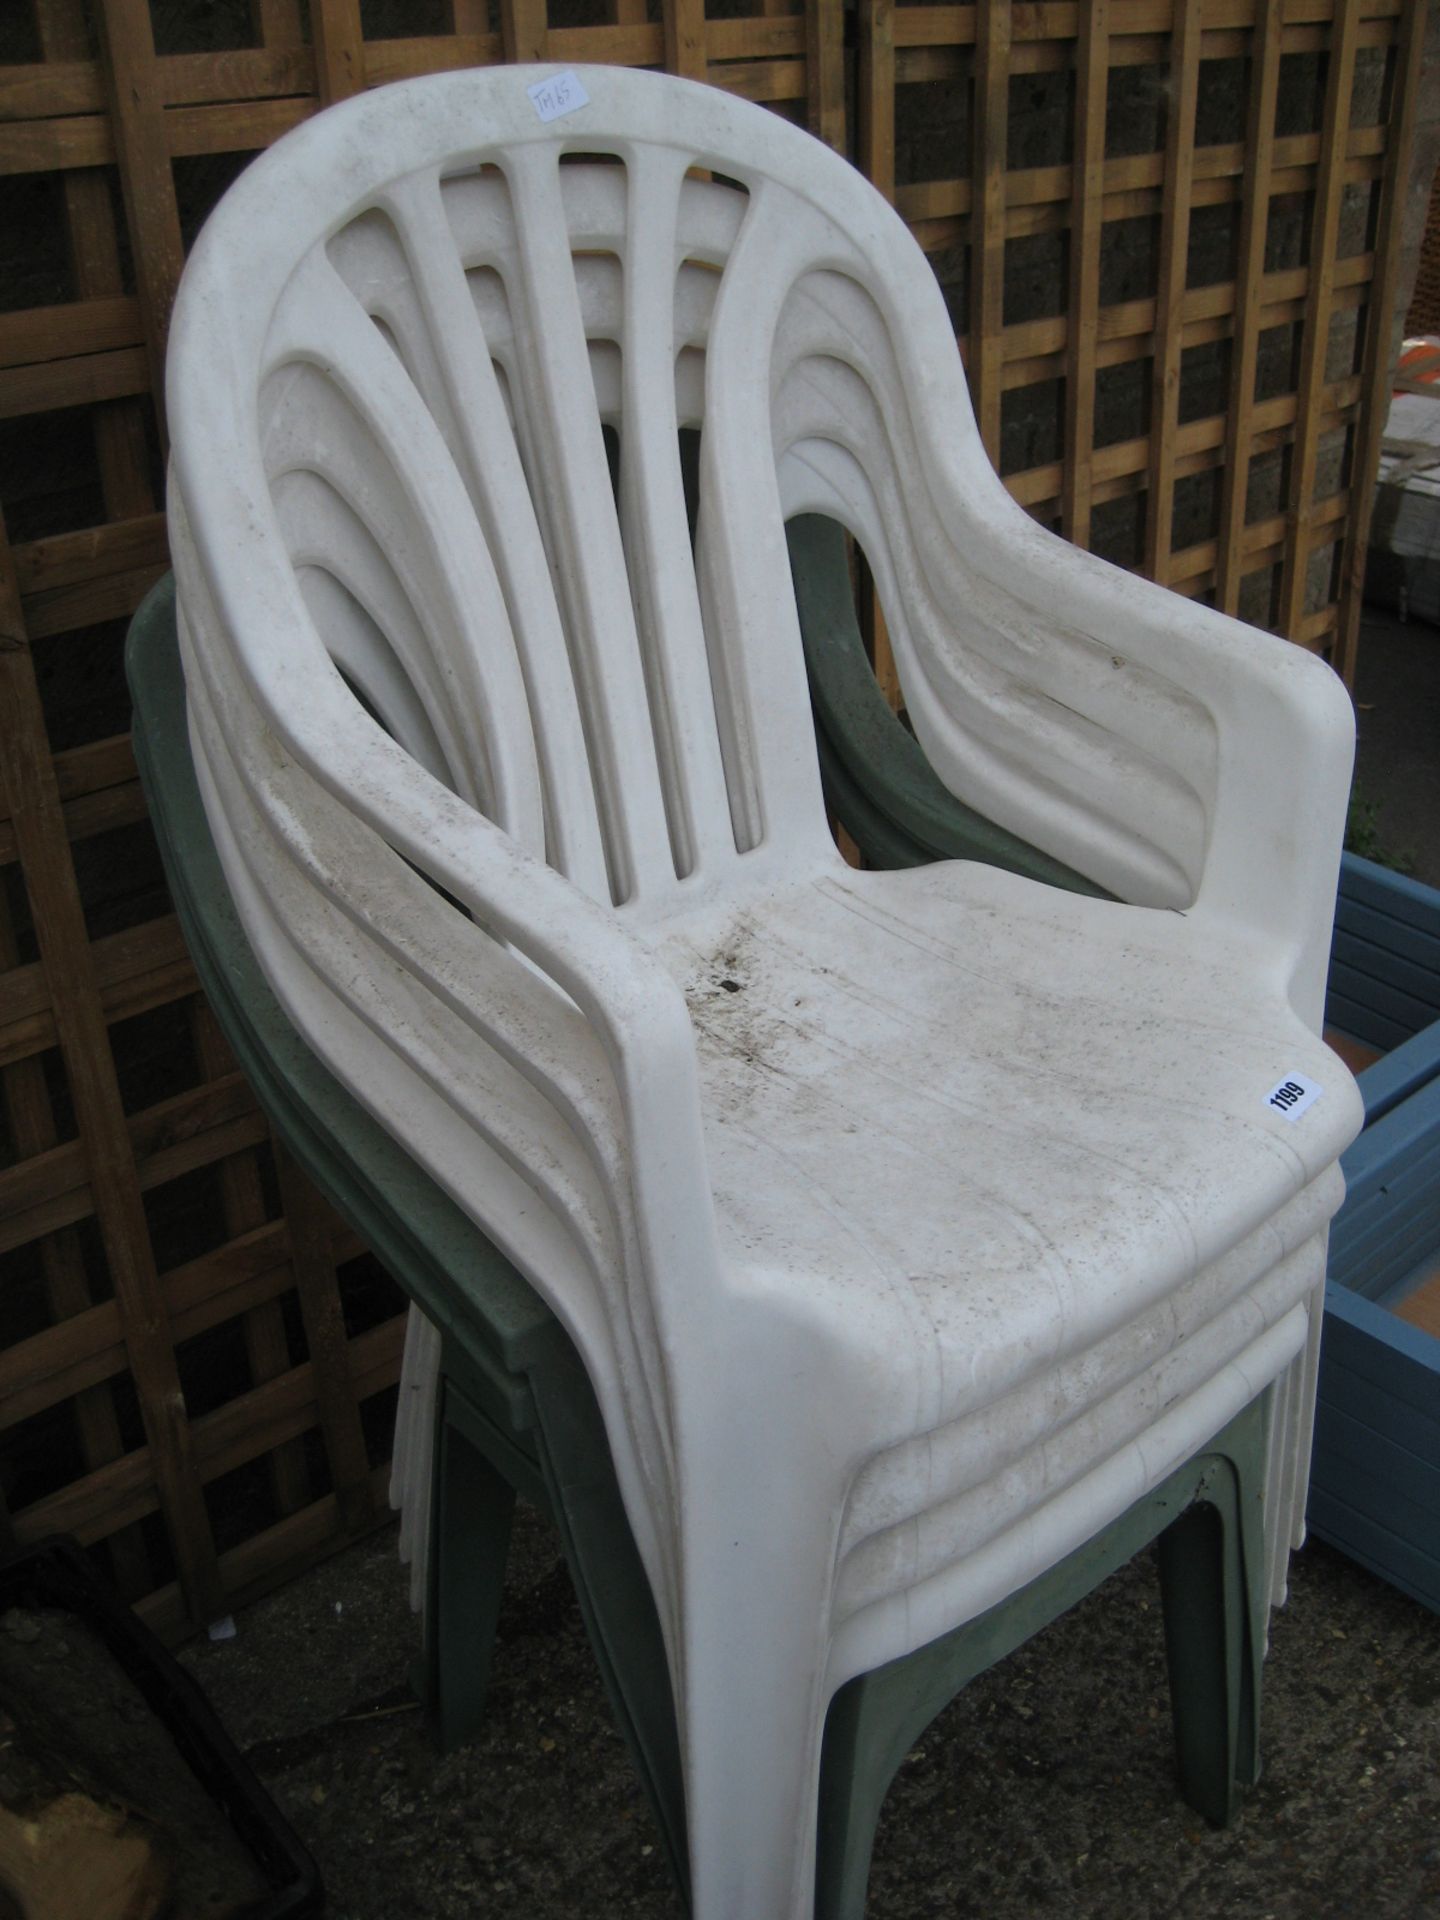 Stack of 6 plastic garden chairs in white and green